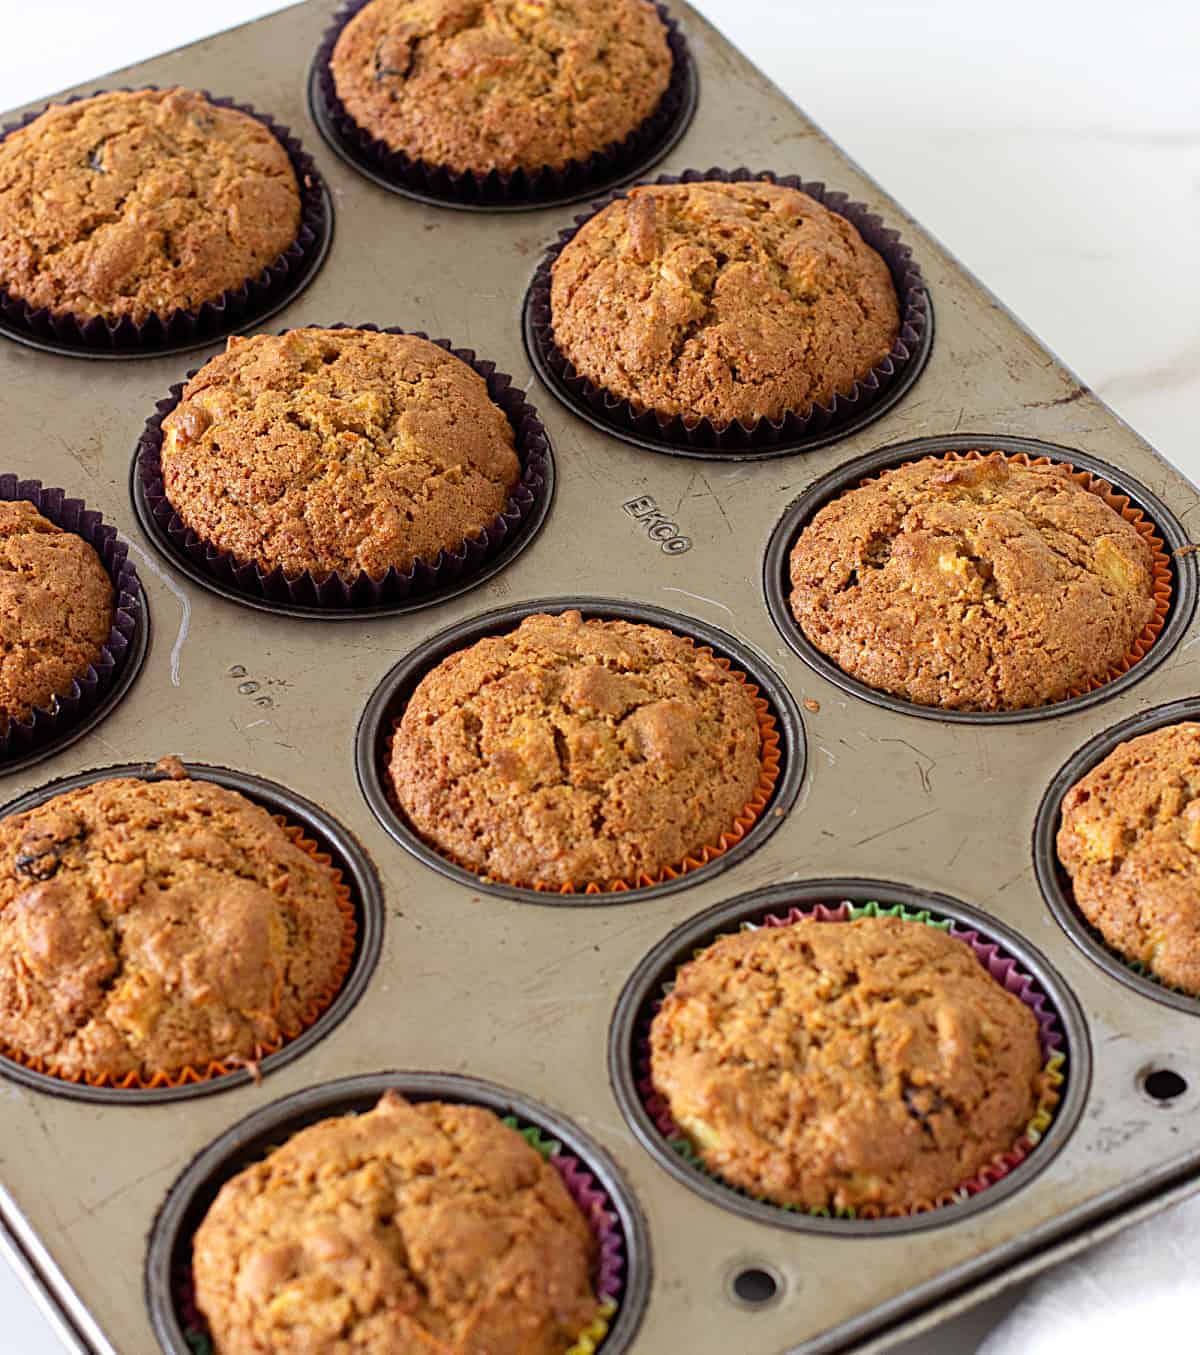 A large metal muffin pan with baked muffins in paper liners